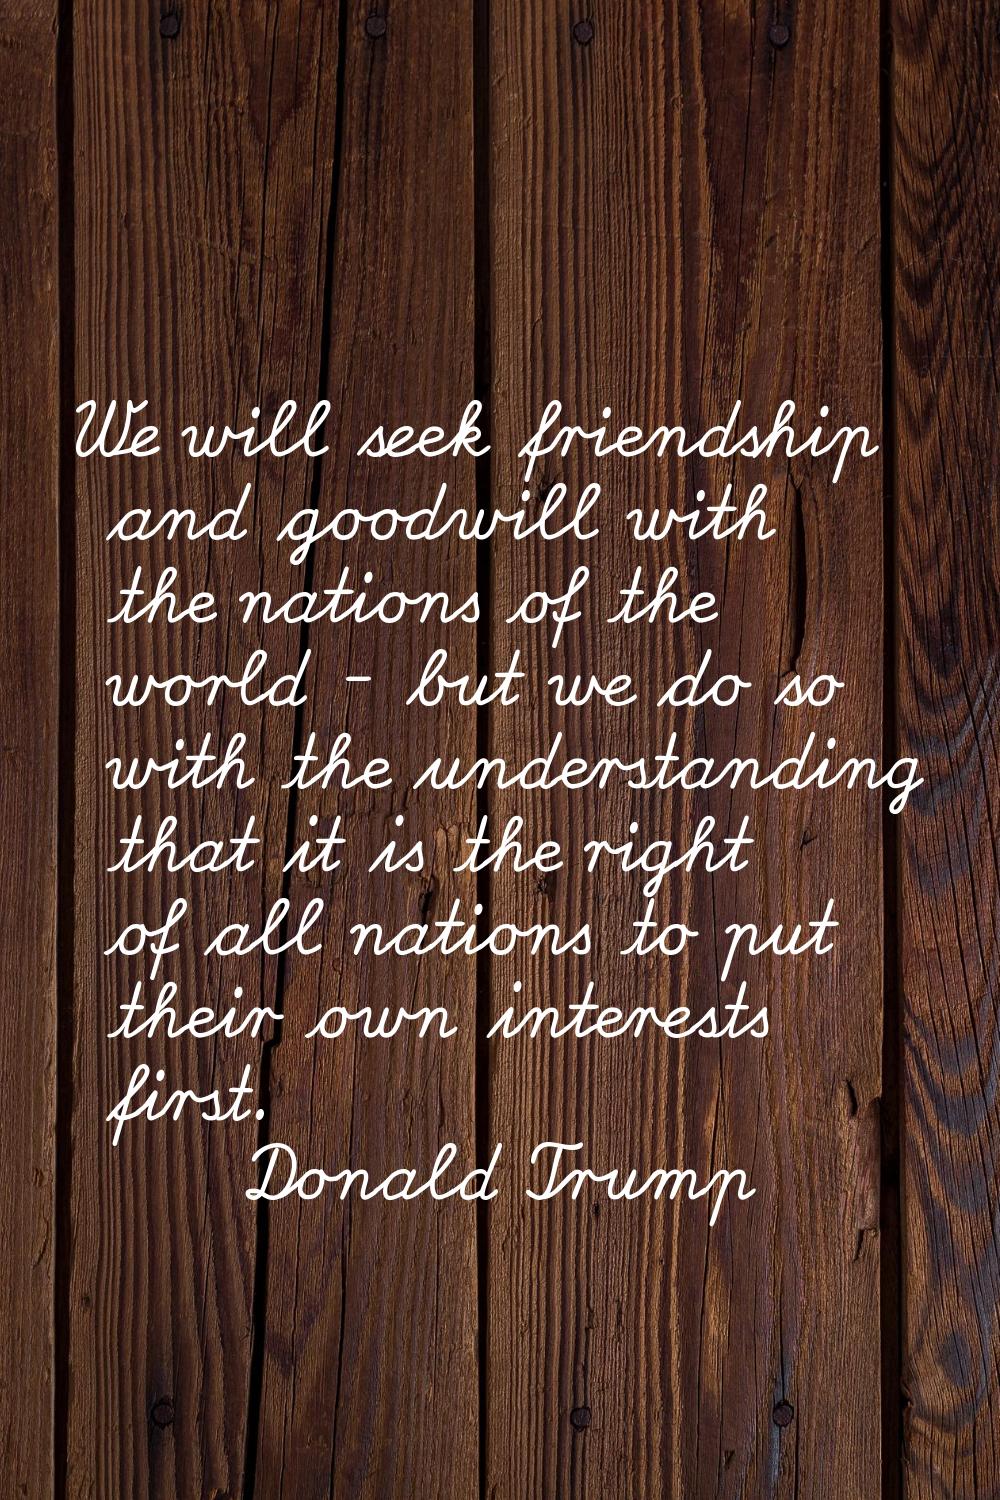 We will seek friendship and goodwill with the nations of the world - but we do so with the understa